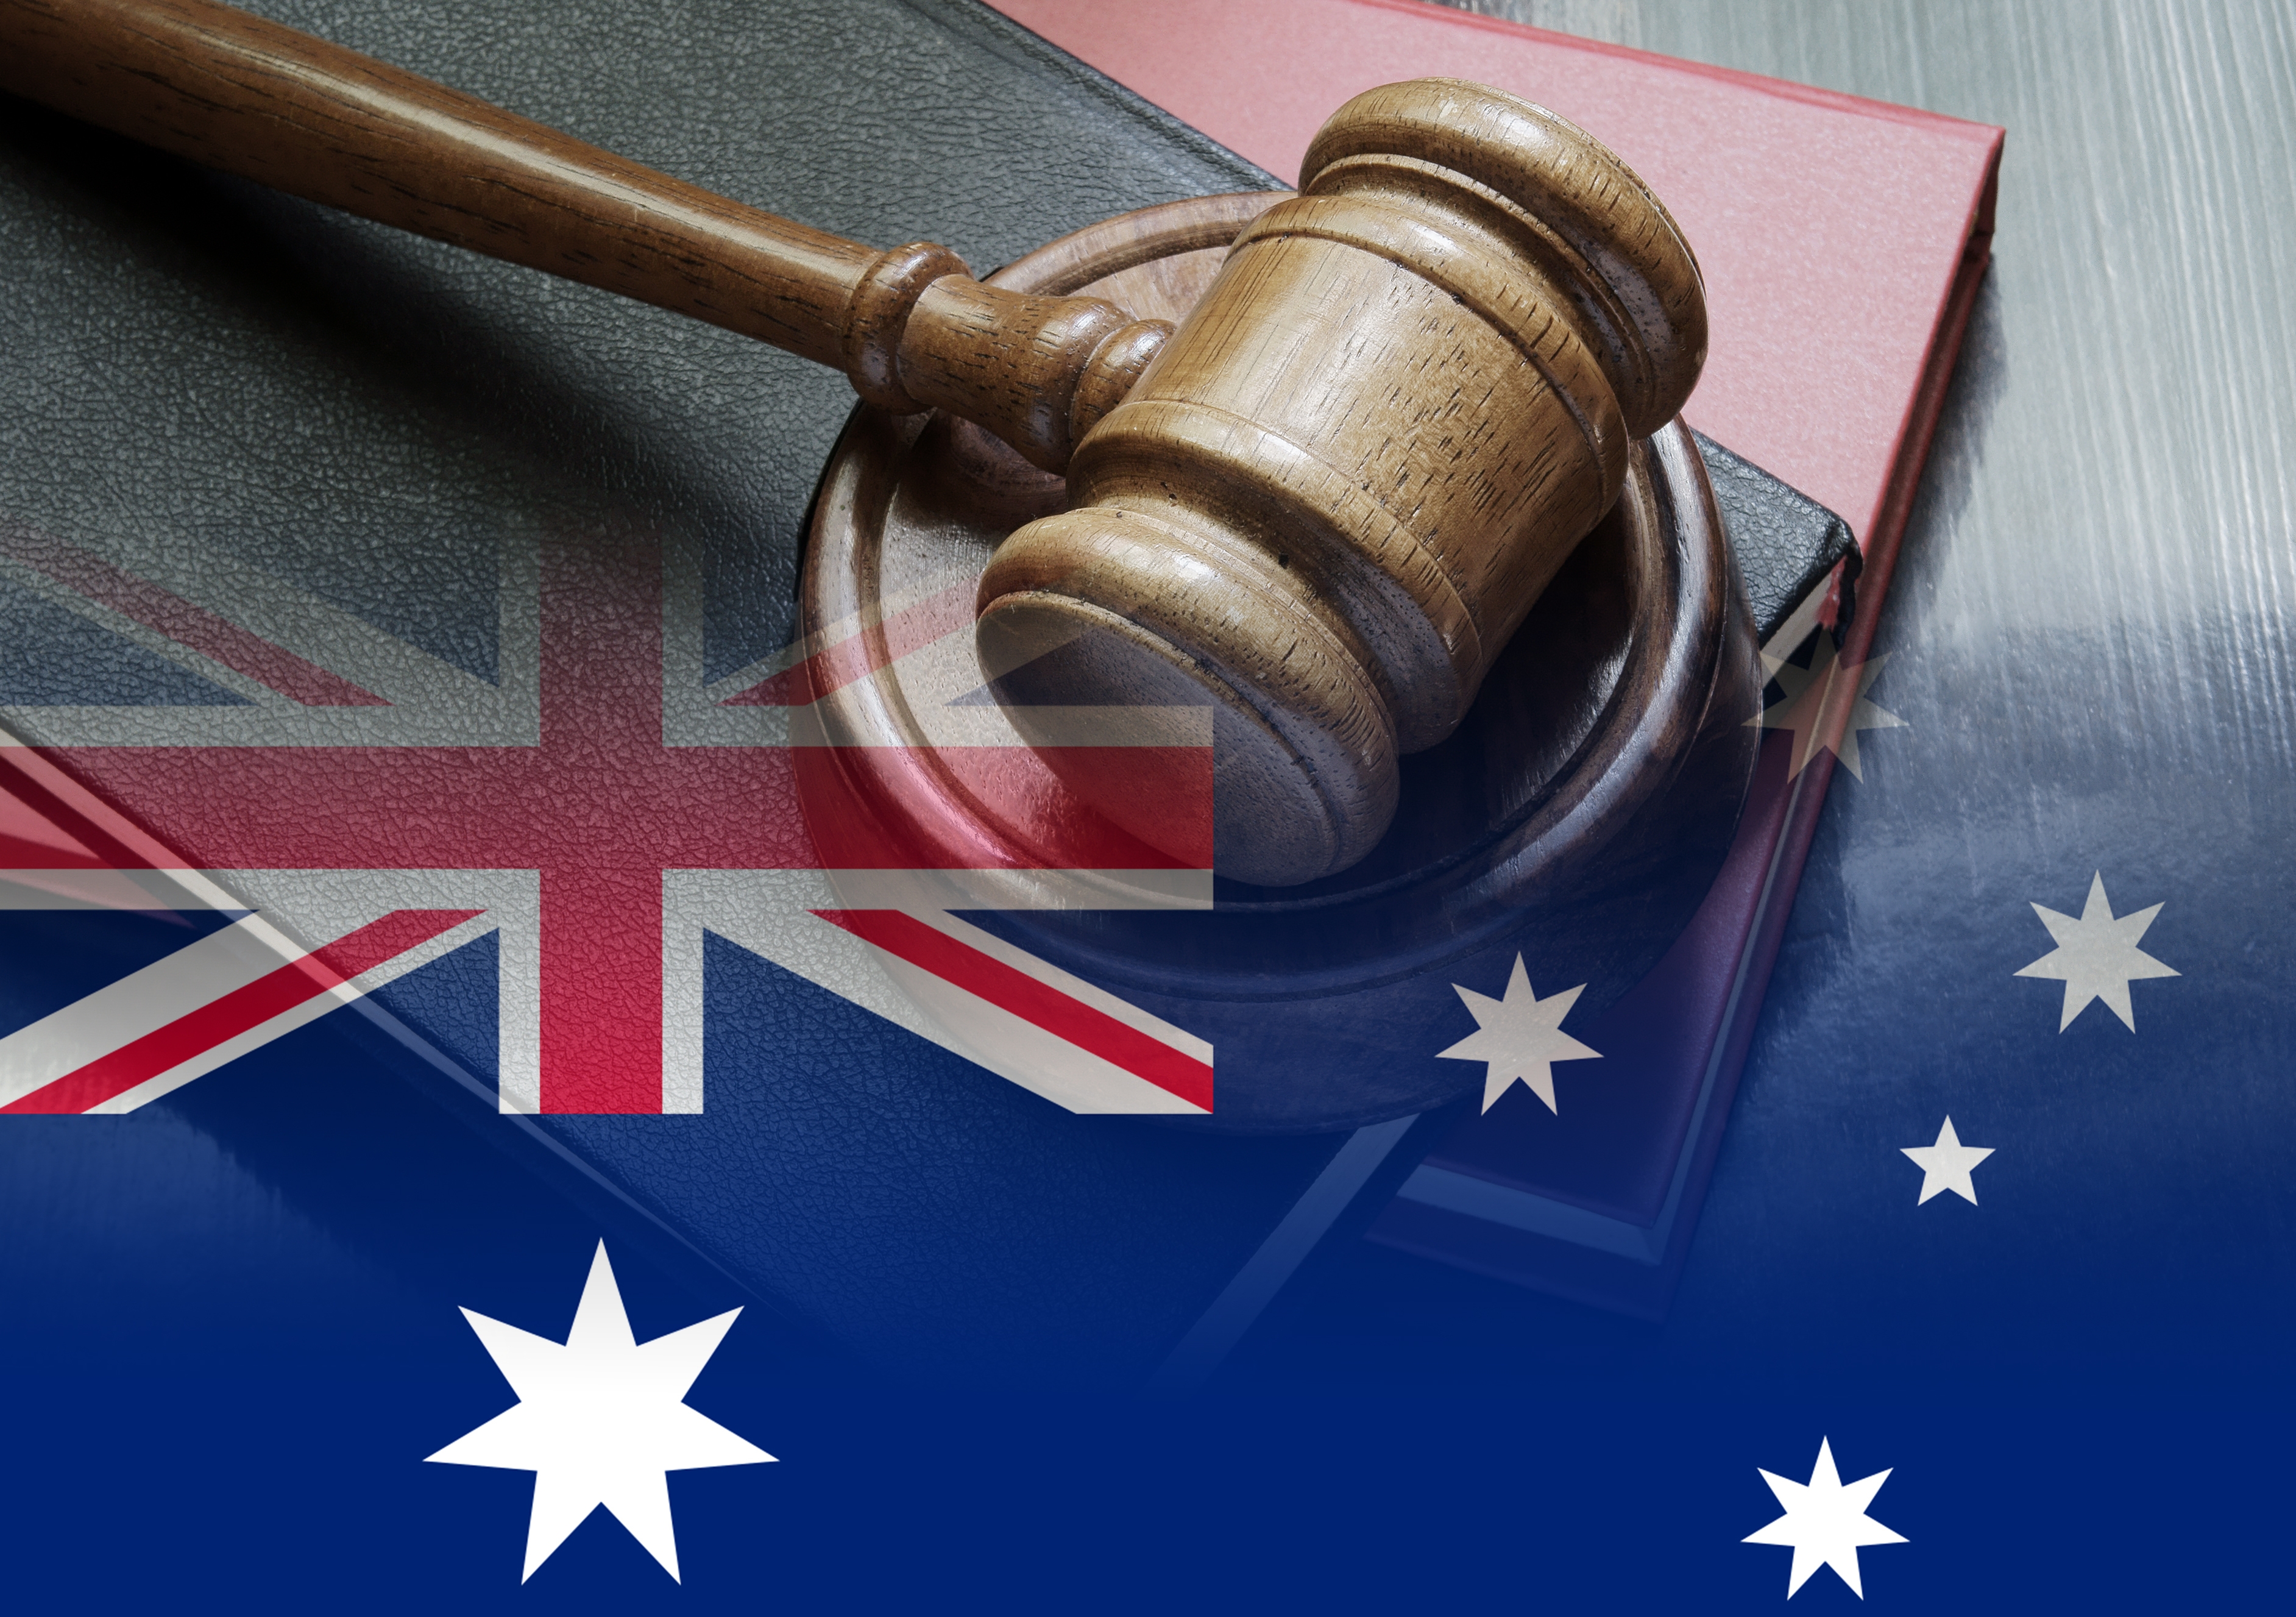 Susan Kiefel takes over from Robert French at a time when the Australian High Court is held in high regard, yet danger signs are emerging from the swelling of populist, anti-elite opinion in Australia and overseas. Photo: Shutterstock.